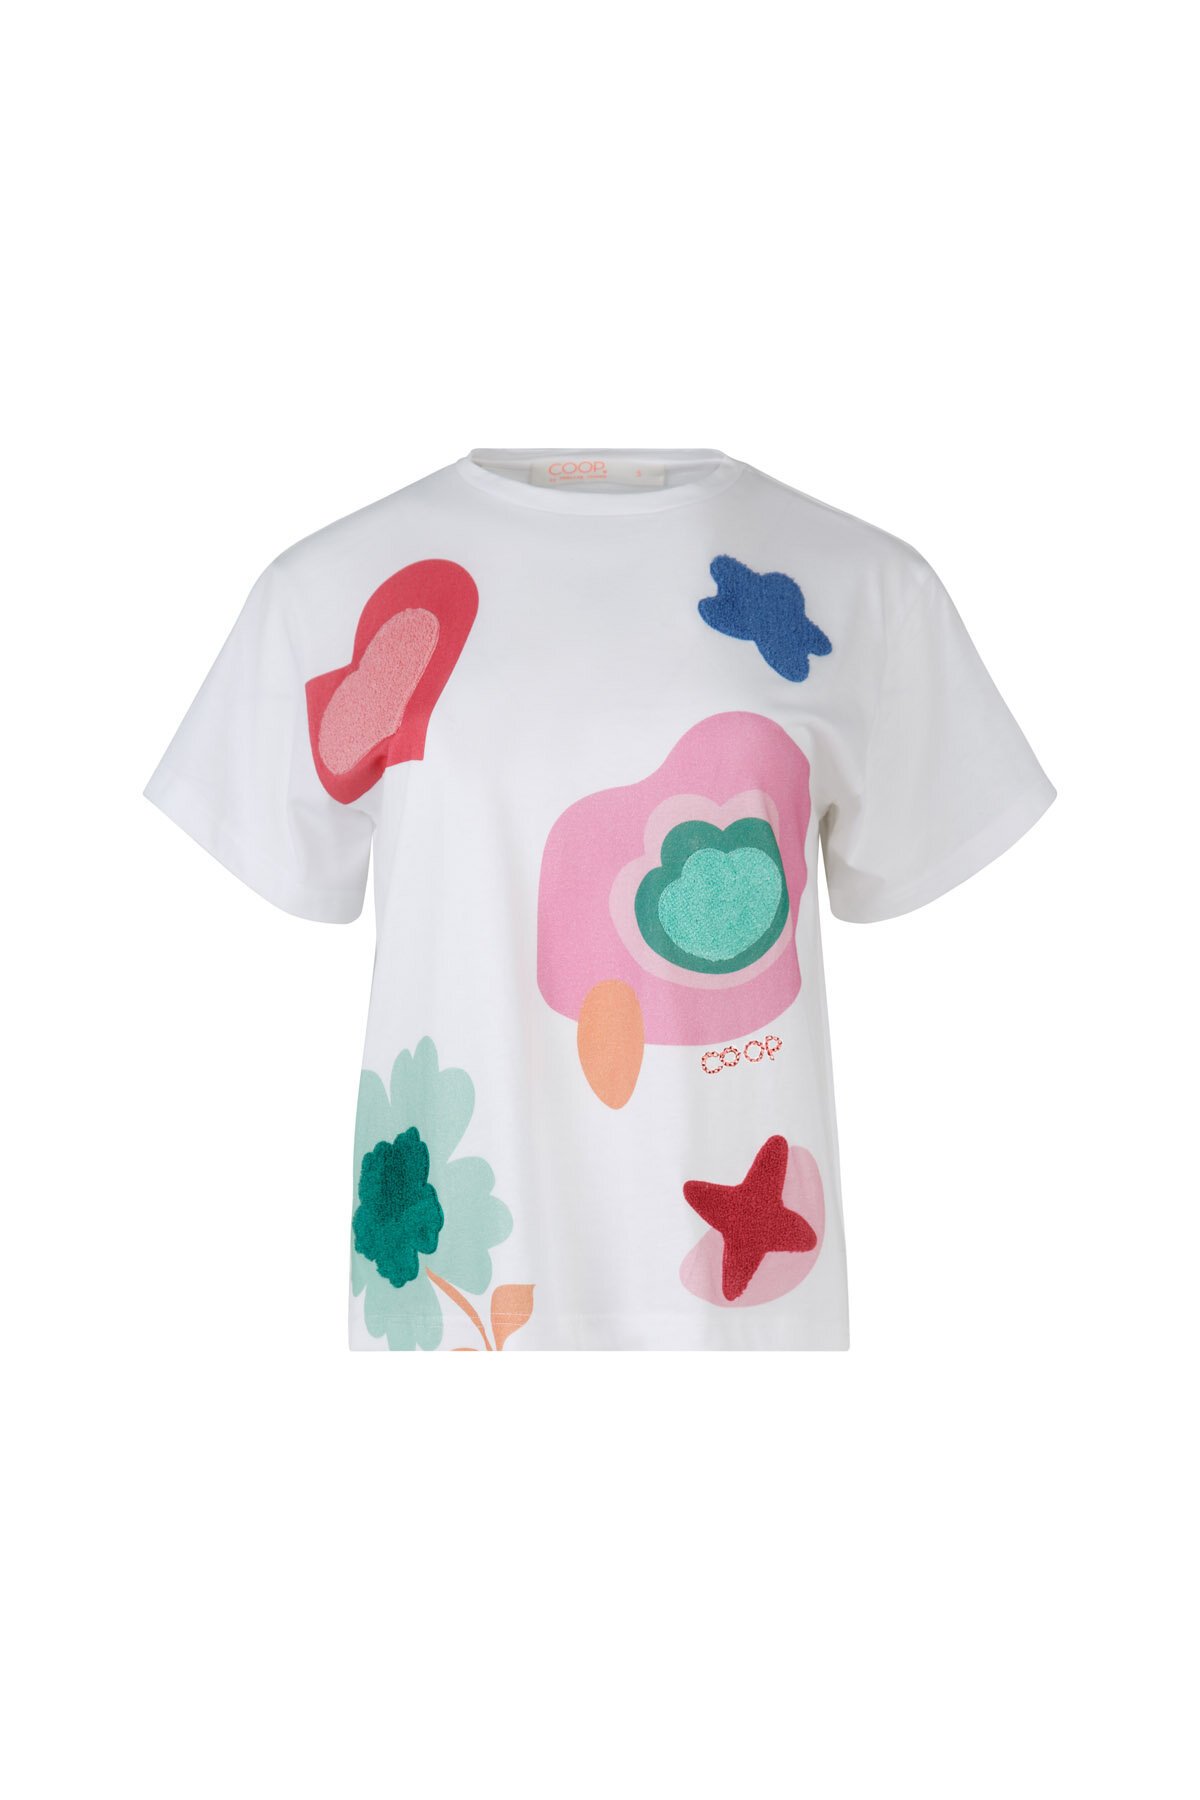 Coop HEART RATE T-SHIRT - Brand-COOP : Diahann Boutique - COOP SS20